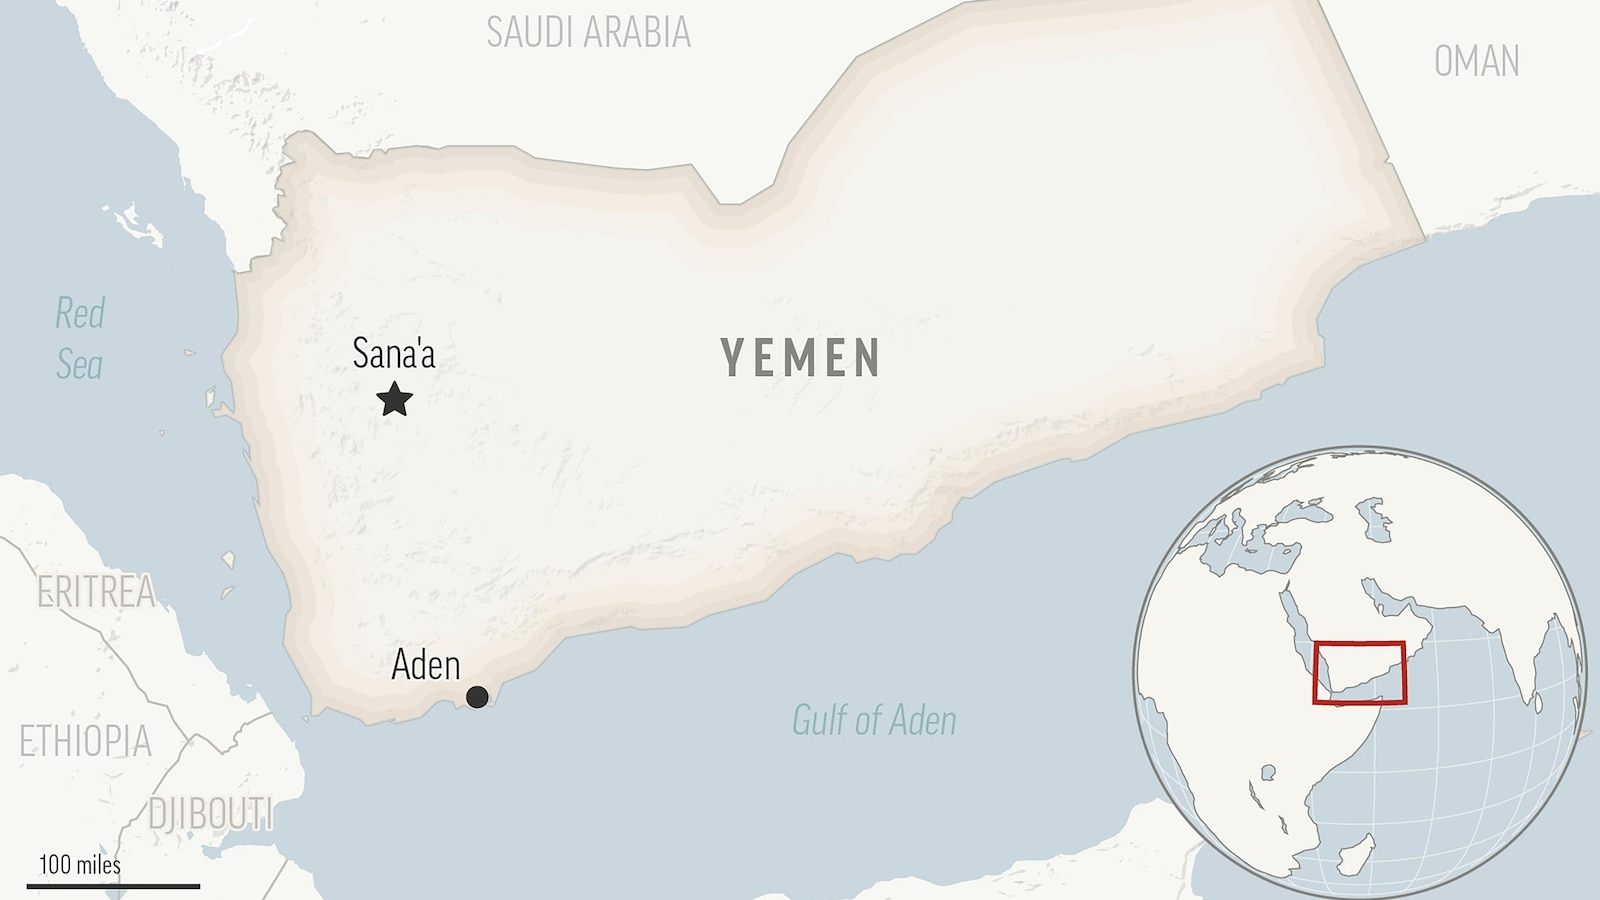 Explosion near ship in Red Sea believed to be caused by Yemen's Houthi rebels